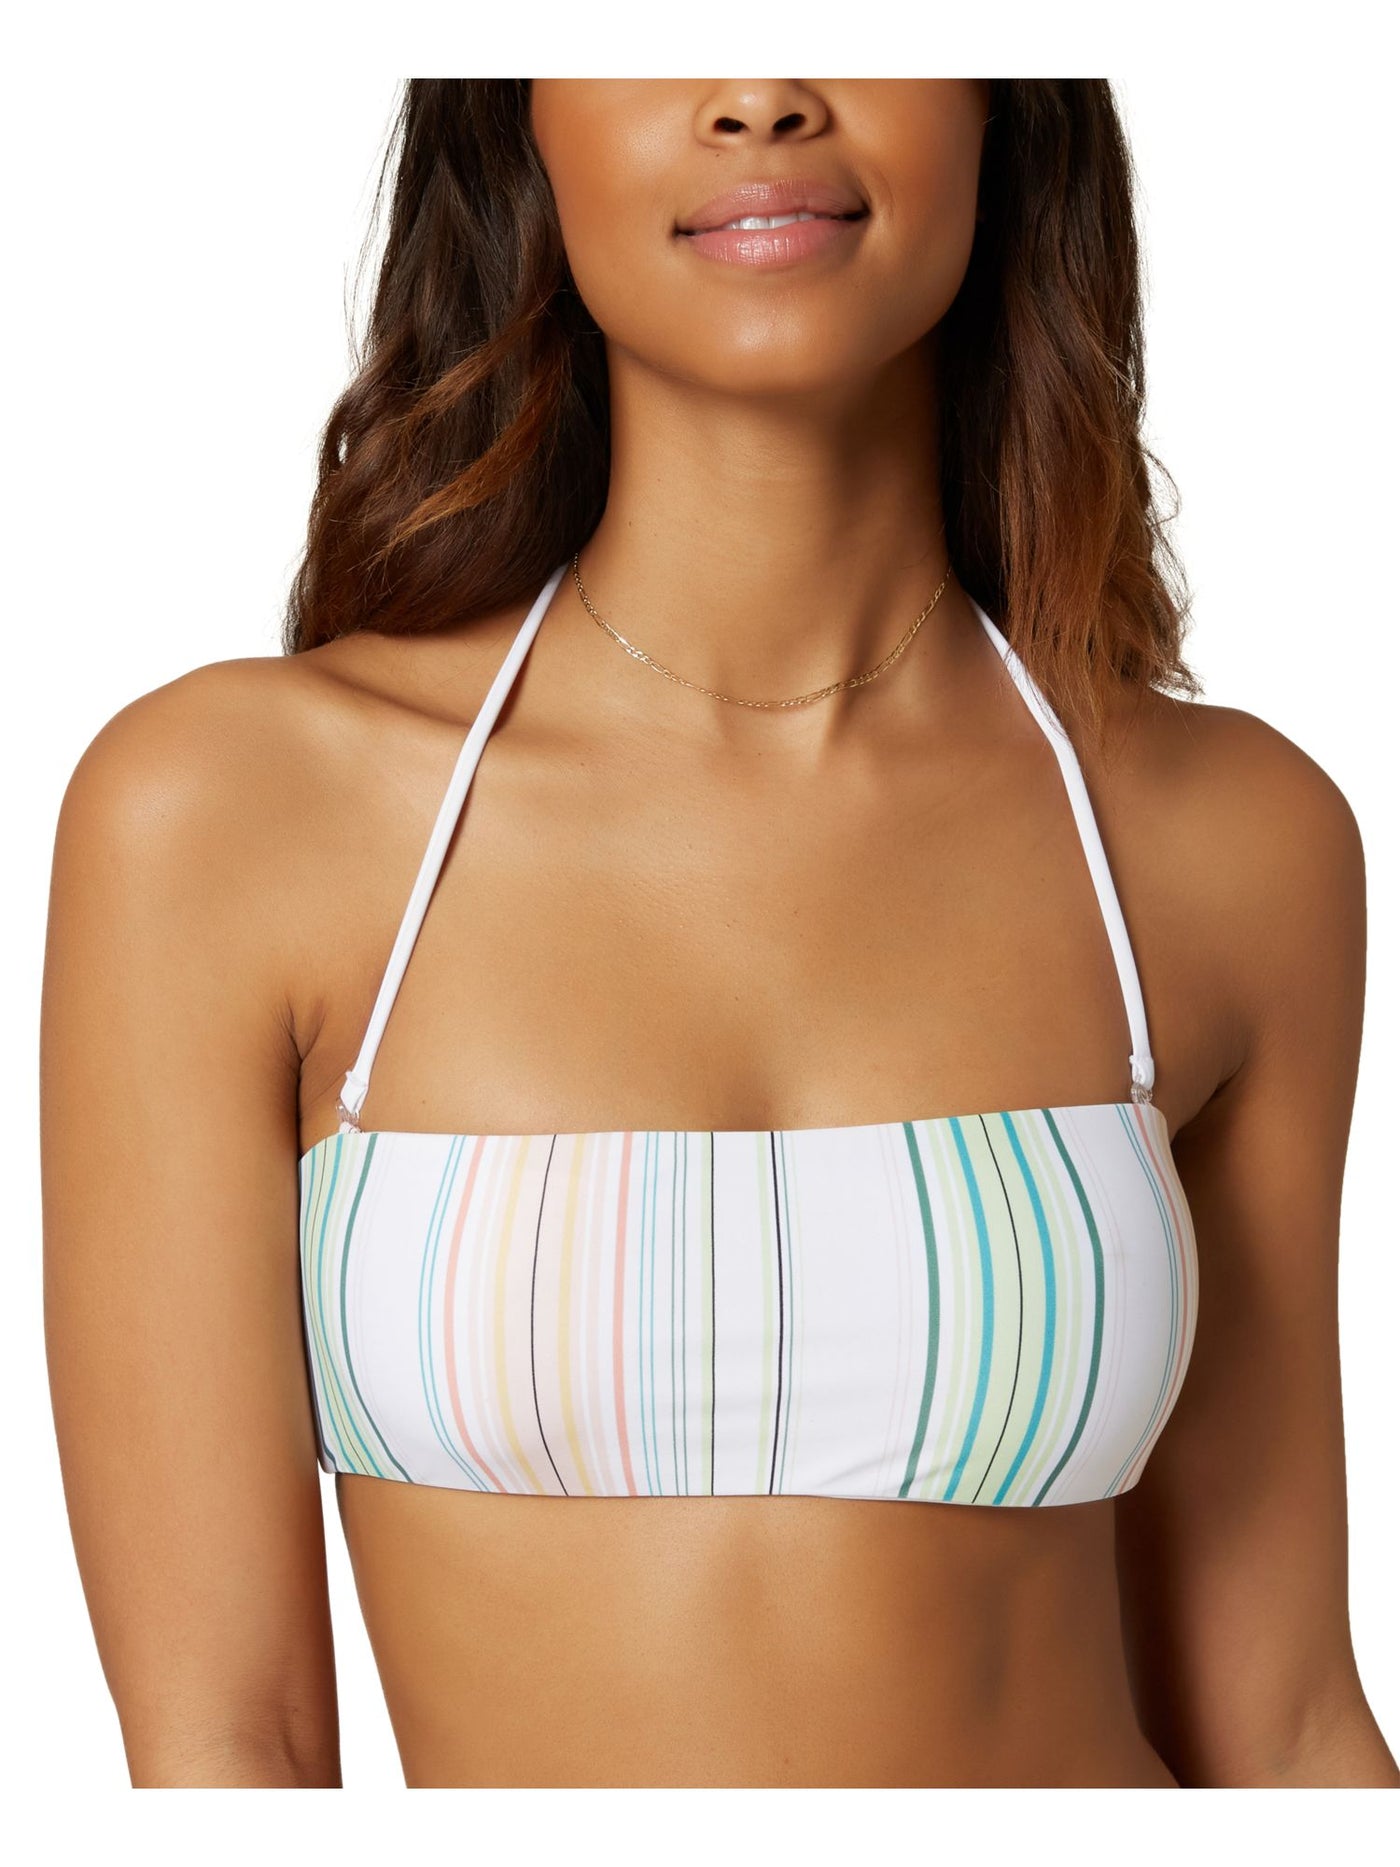 O'NEILL Women's Multi Color Striped Stretch Push-Up Convertible Tie Dreamland Beach Bandeau Swimsuit Top XL